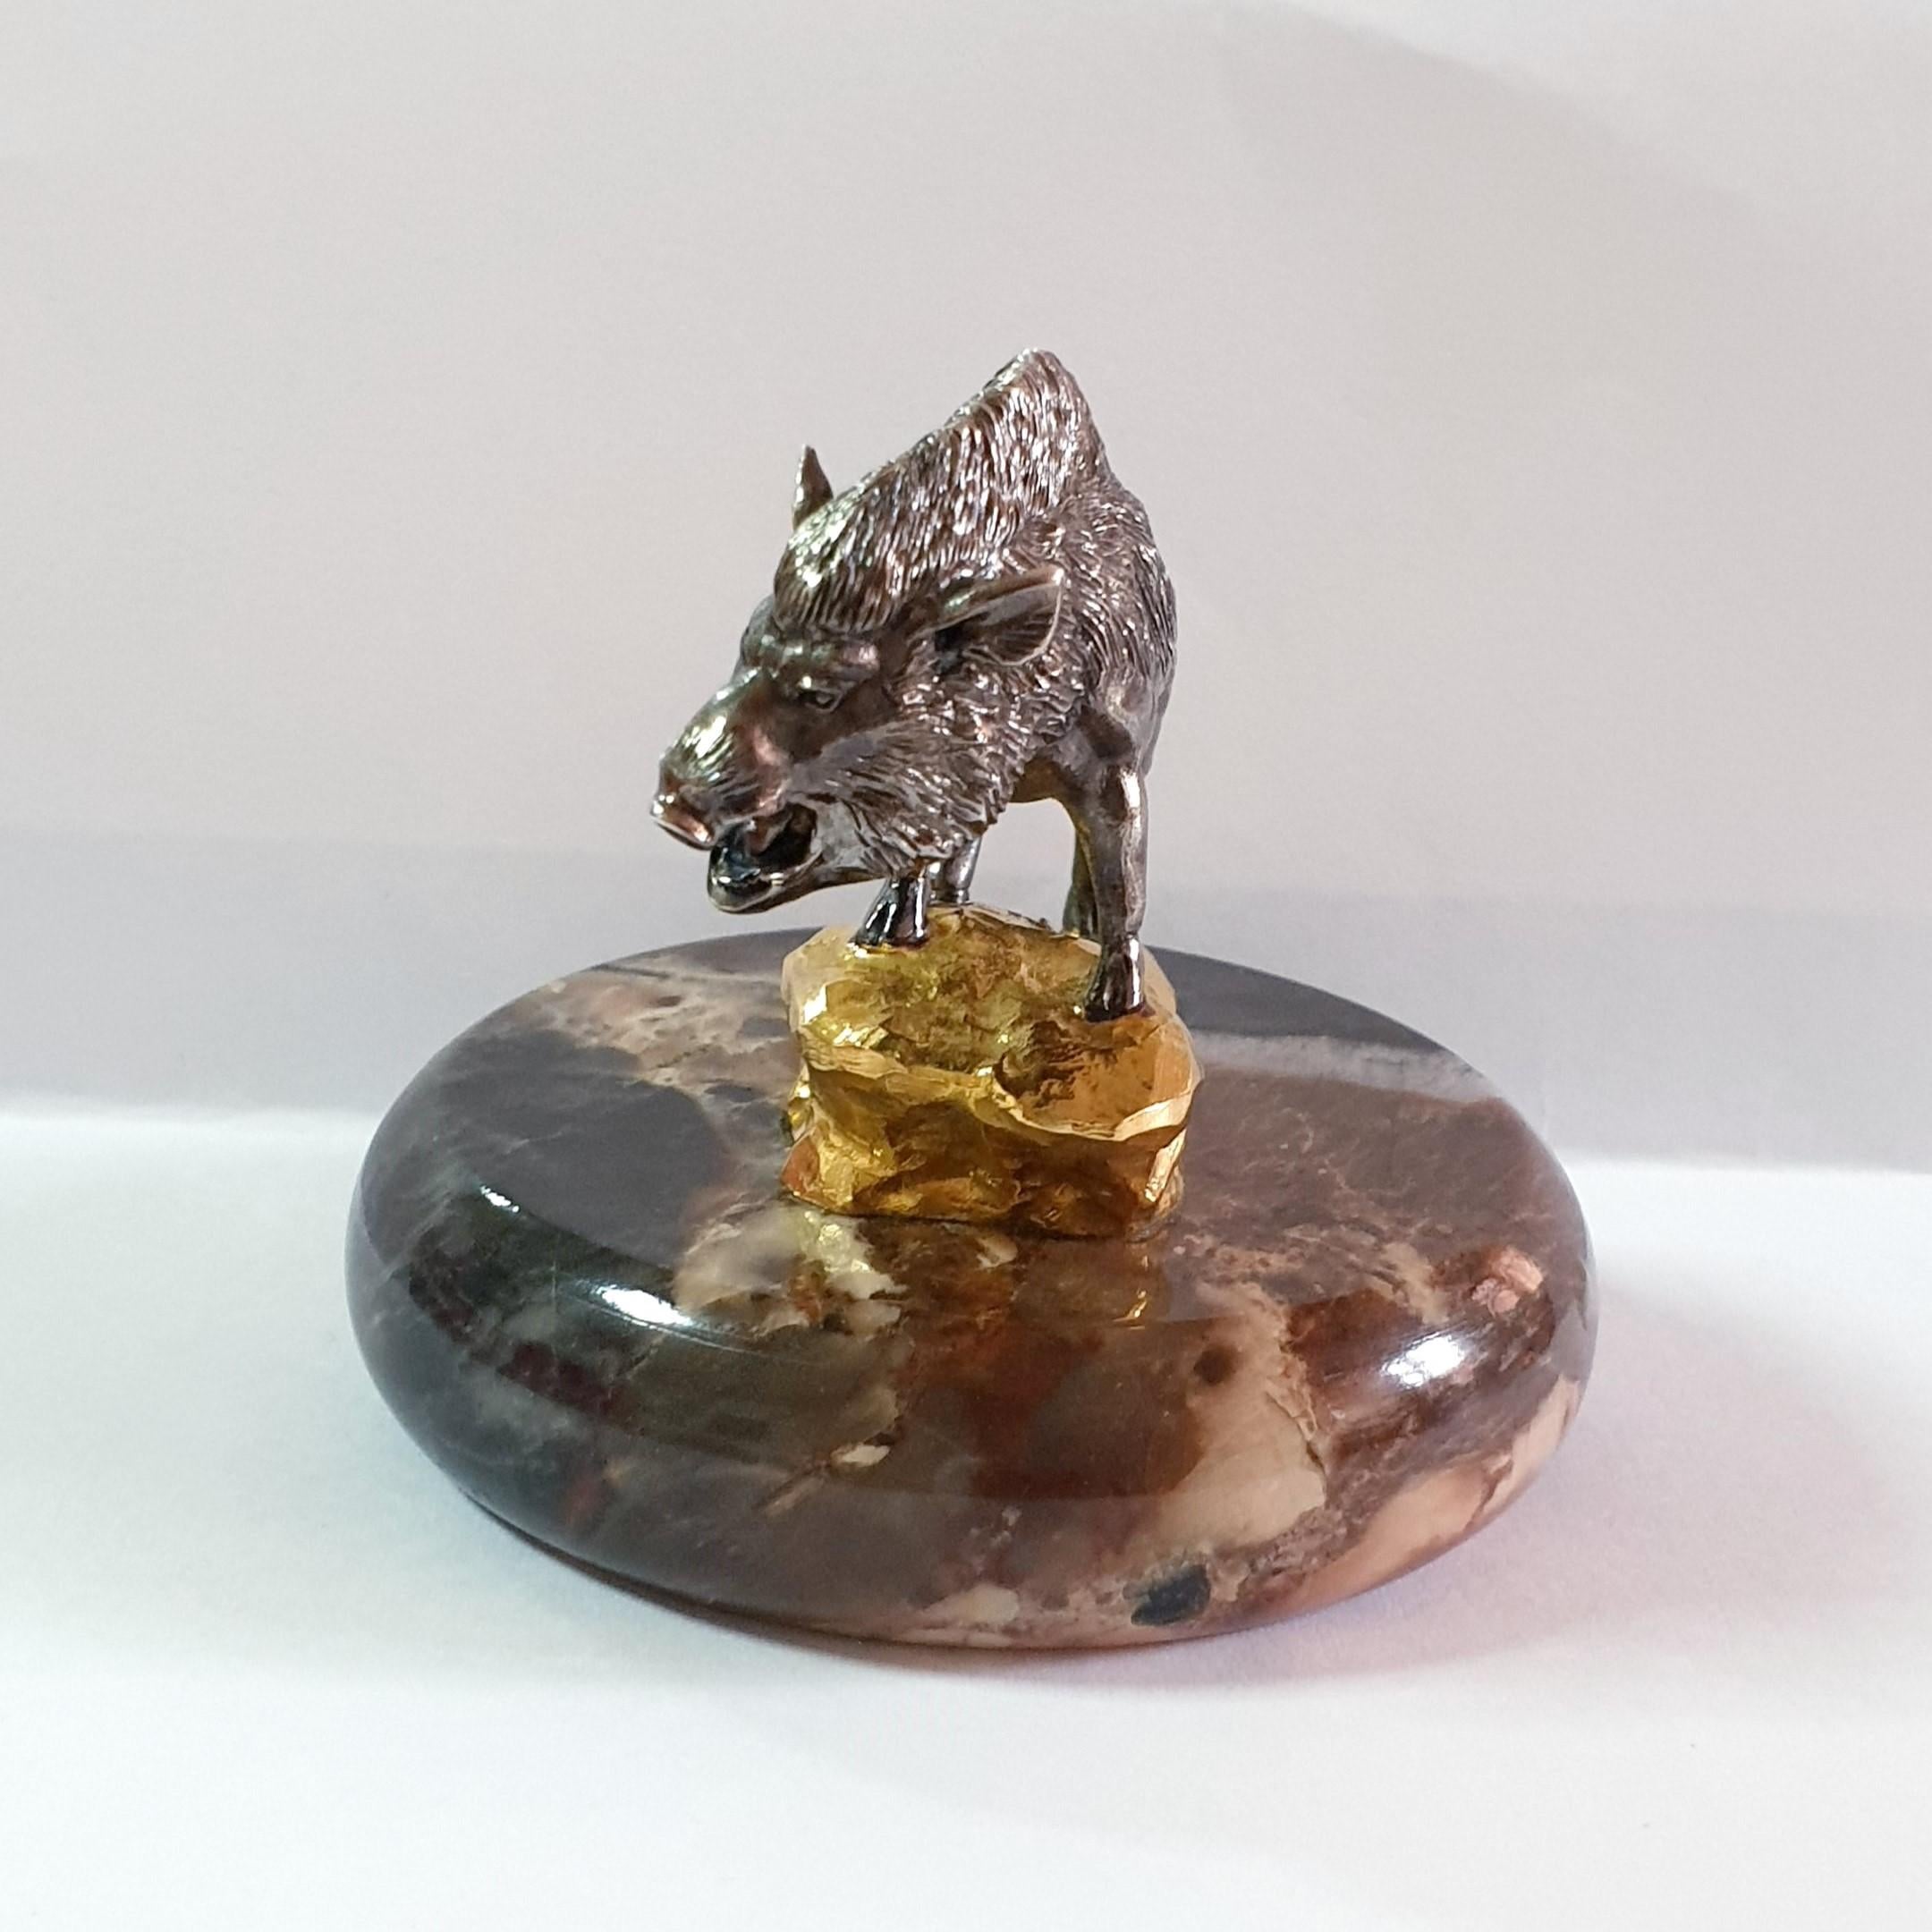 A pig, a symbol of fertility and abundance, was made into a silver miniature with a creative idea and masterful craftsmanship. A genuine silver wild pig has lively facial features and a brave posture. He stands proudly on a golden rock mountain,